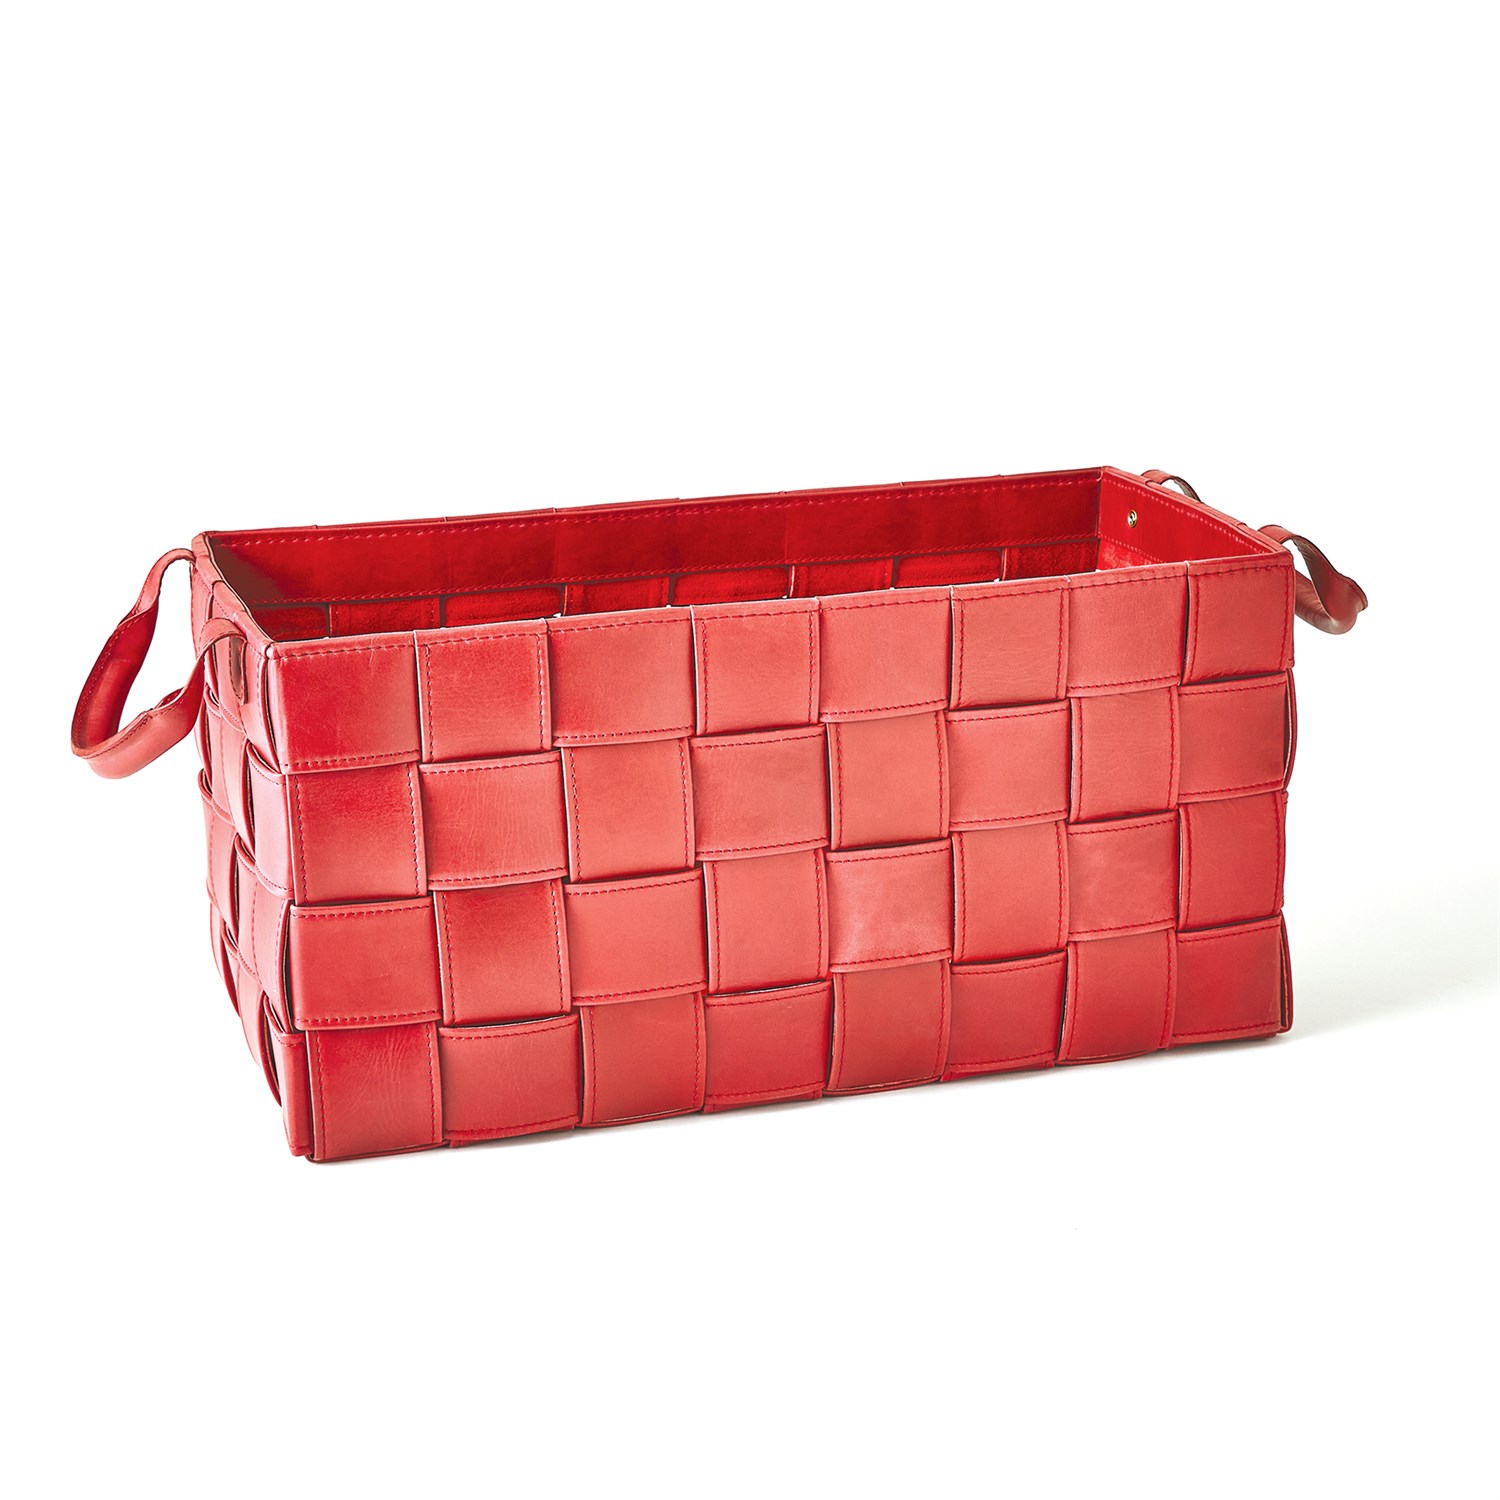 Global Views Soft Woven Leather Large Basket in Deep Red